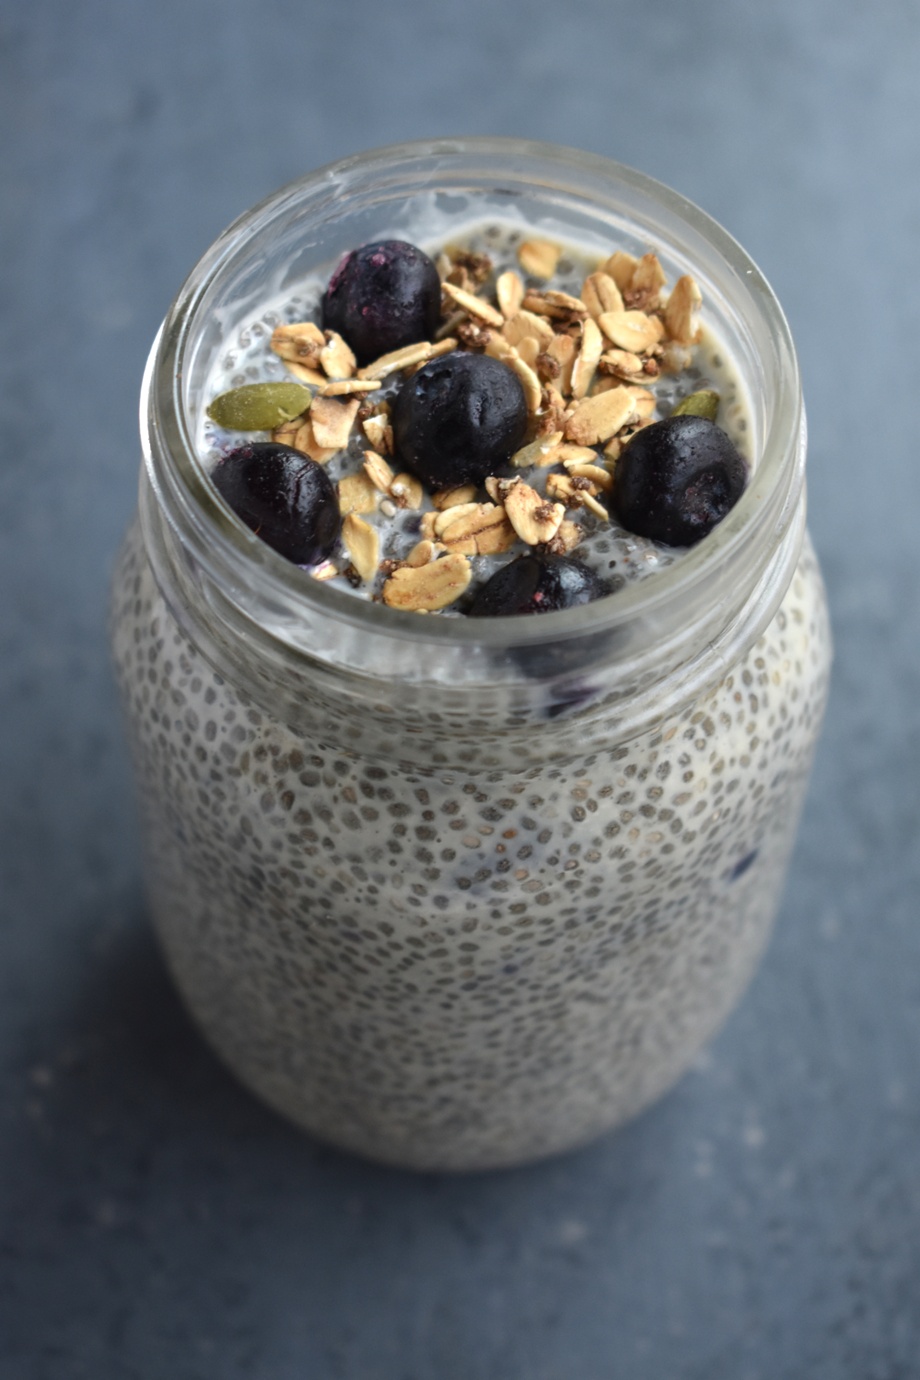 Blueberry Vanilla Chia Seed Pudding takes 5 minutes to make, is super tasty and is a protein, fiber and omega-3 rich breakfast!